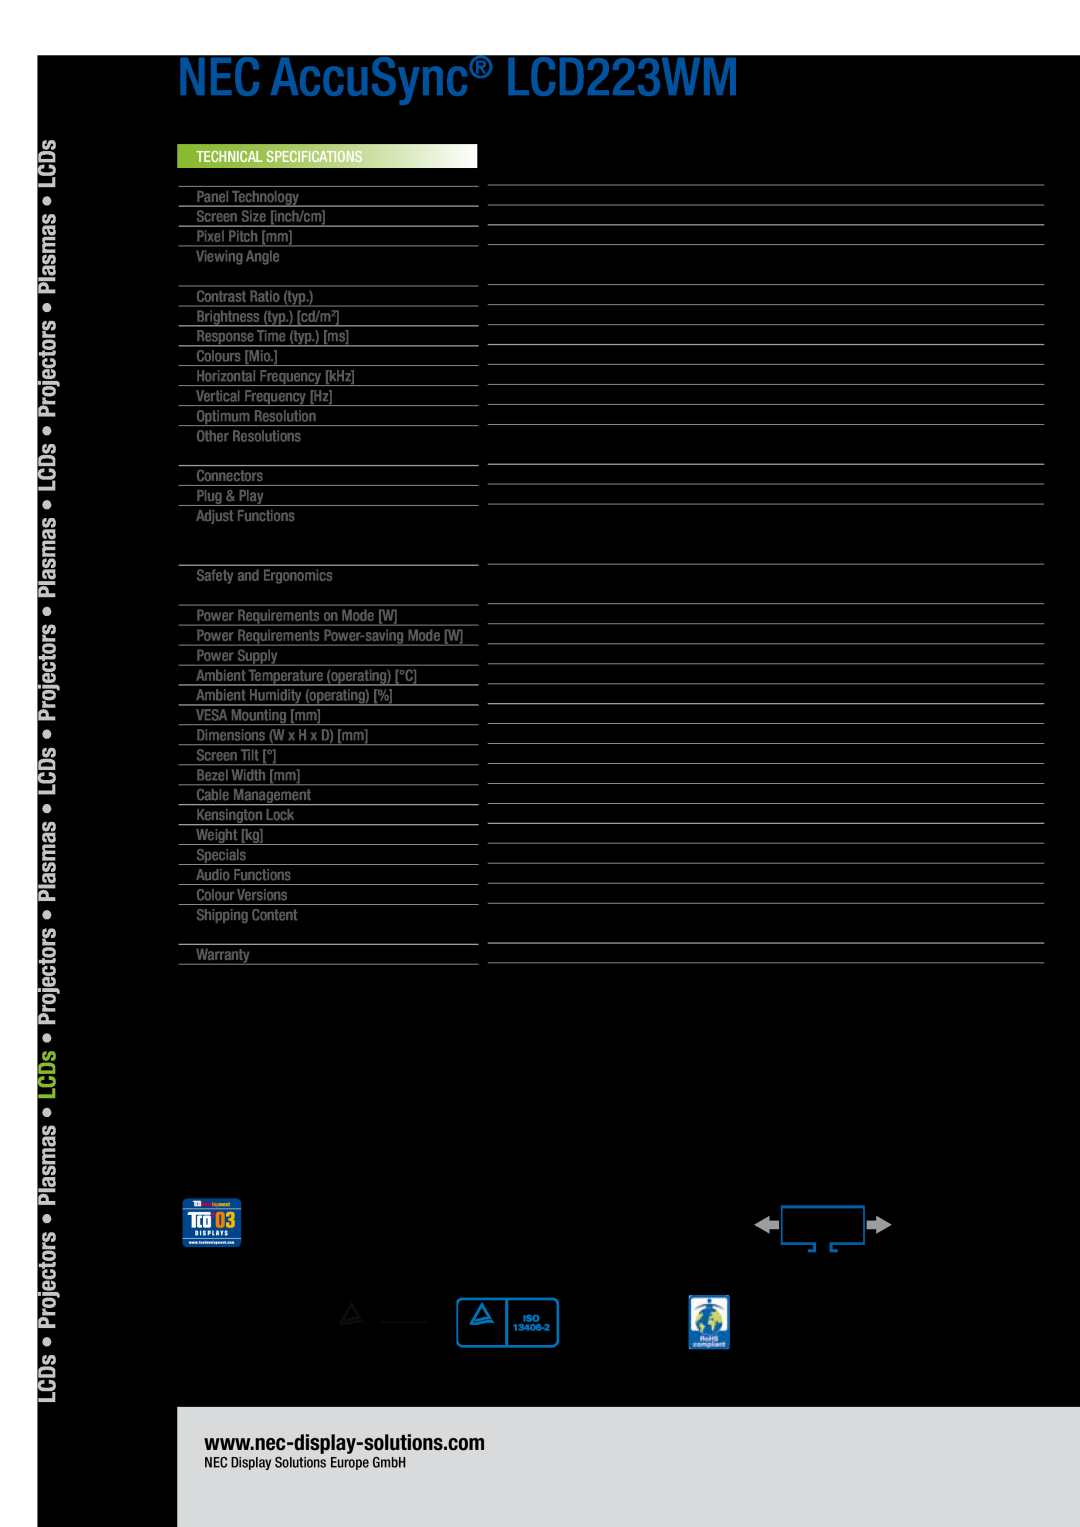 NEC manual LCDs, NEC AccuSync LCD223WM, Technical Specifications 